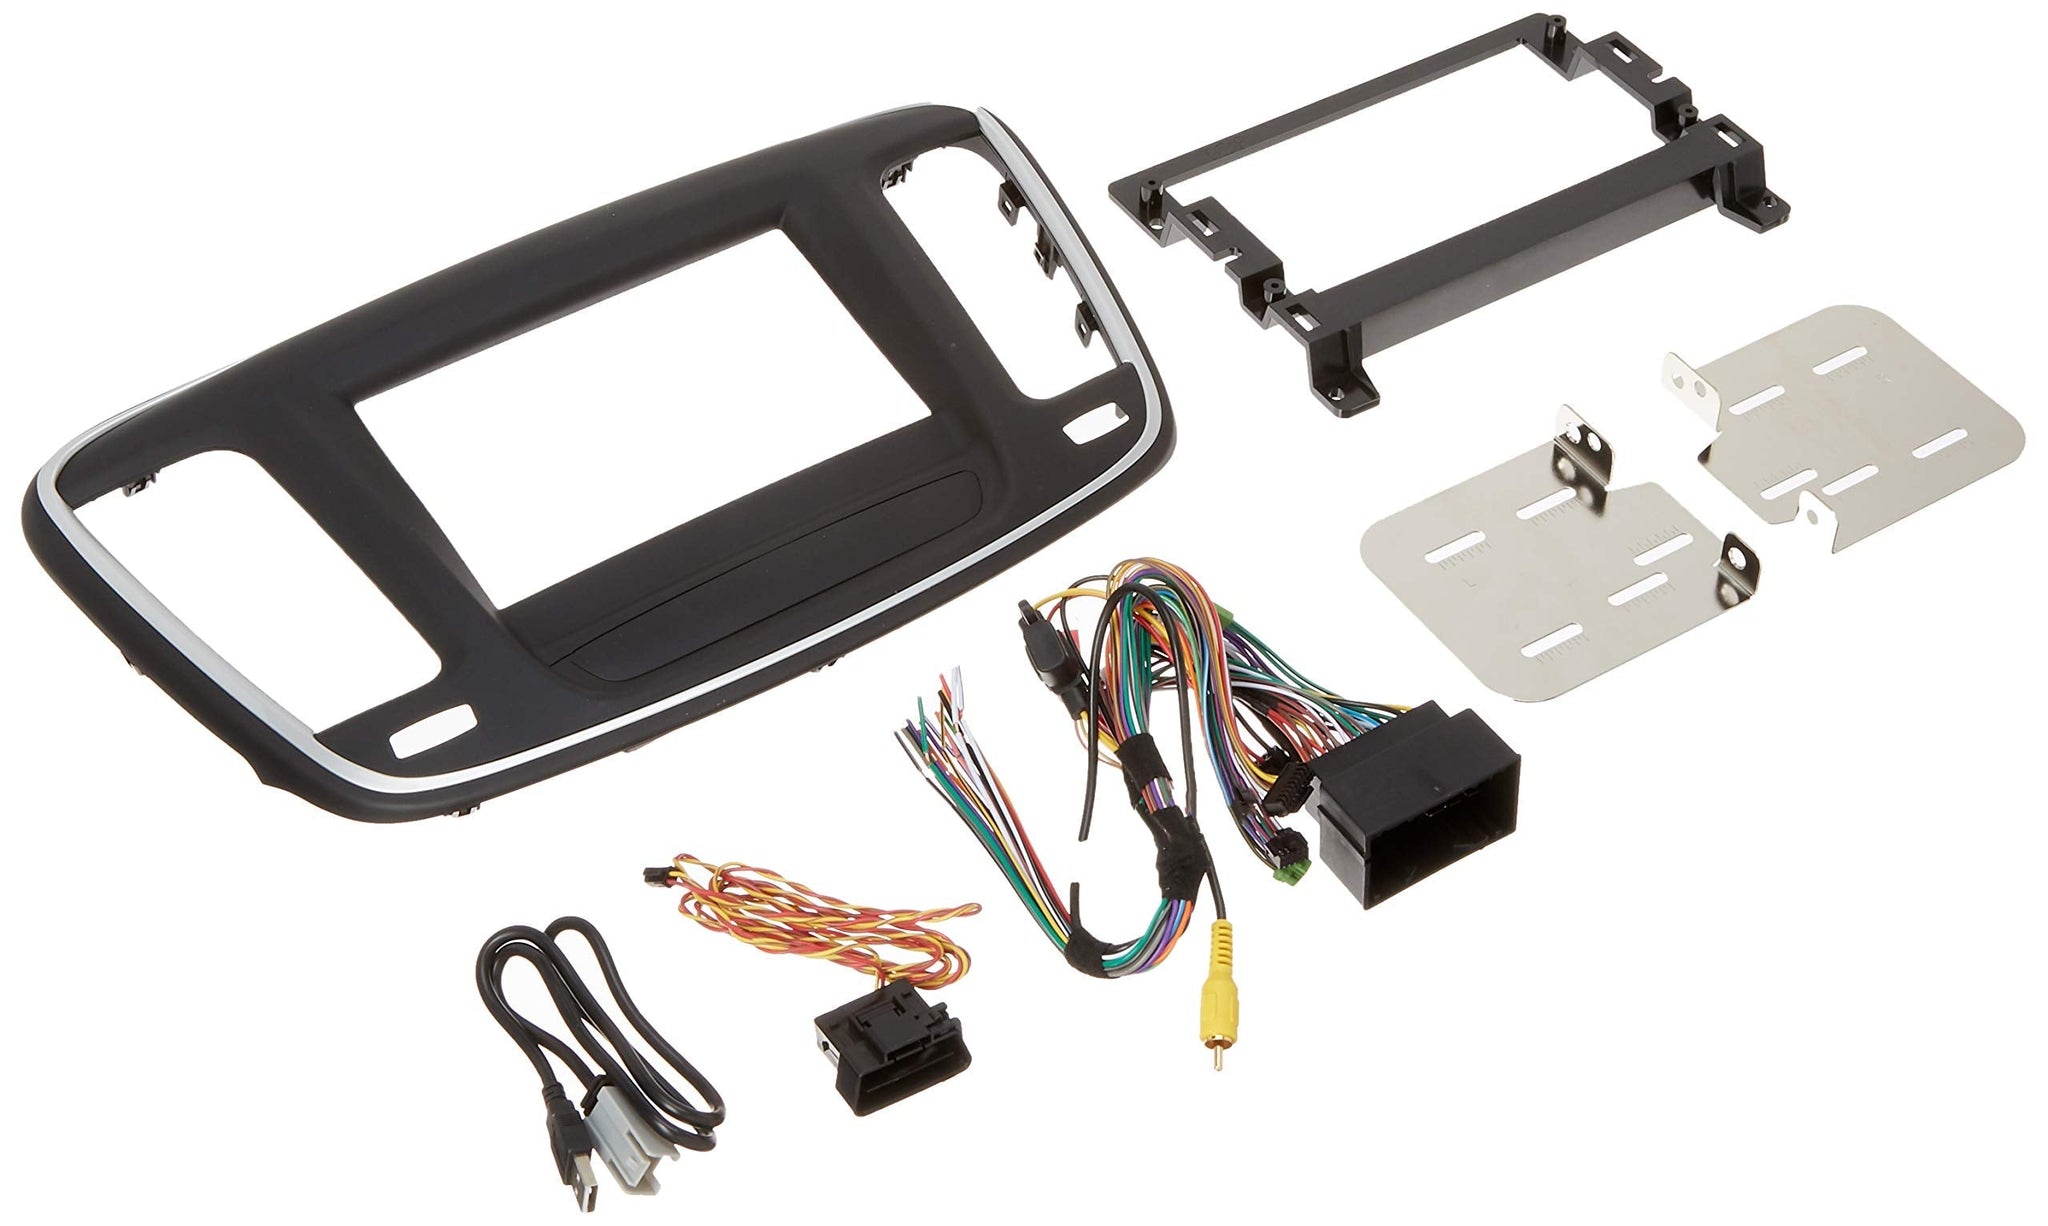 iDatalink KIT-C200 Dash and Wiring Kit Install an iDatalink-ready stereo in 2015-17 Chrysler 200s — MRR or MRR2 module also required (Black/Silver)